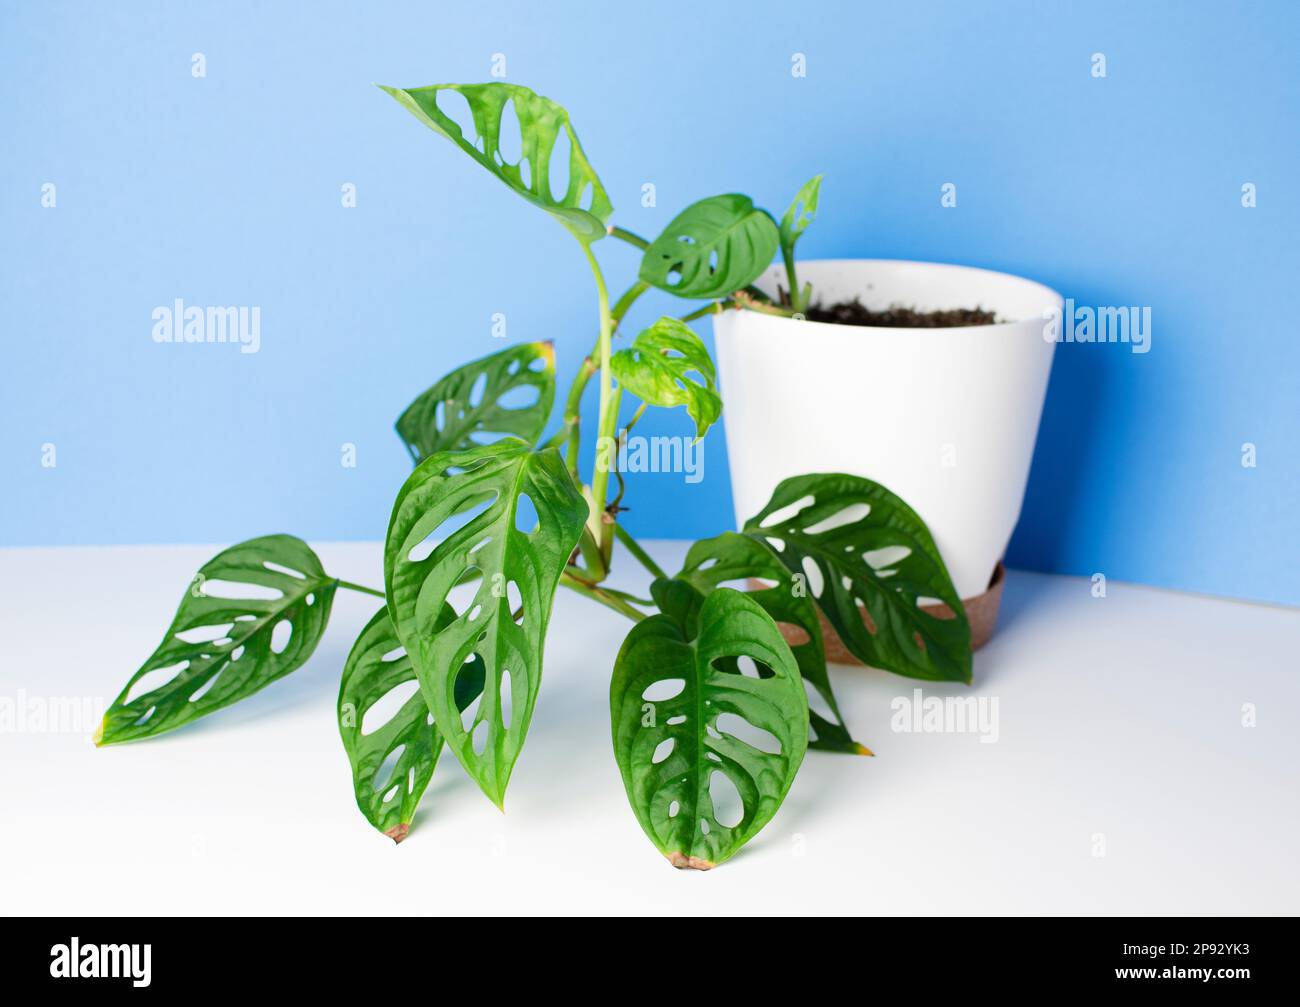 Monstera Monkey Mask or Obliqua or Adansonii leaves. Home plants in white pot. Minimalism and scandi style concept, urban jungle and garden room. Whit Stock Photo